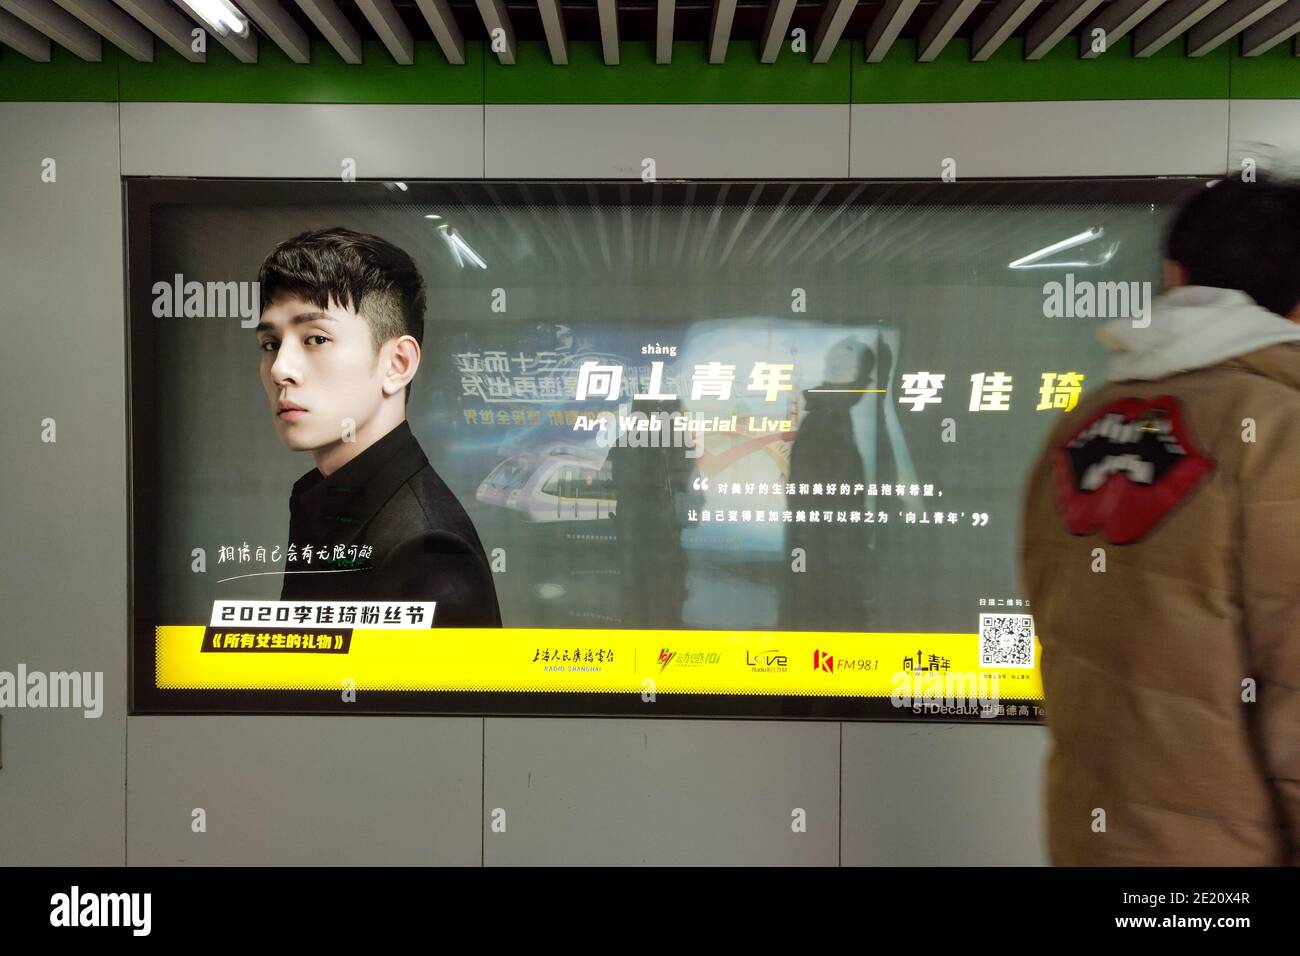 --FILE--The poster of Chinese livestreamer and beauty influencer Li Jiaqi, also known as “king of lipstick,” is seen in a subway station in Shanghai, Stock Photo